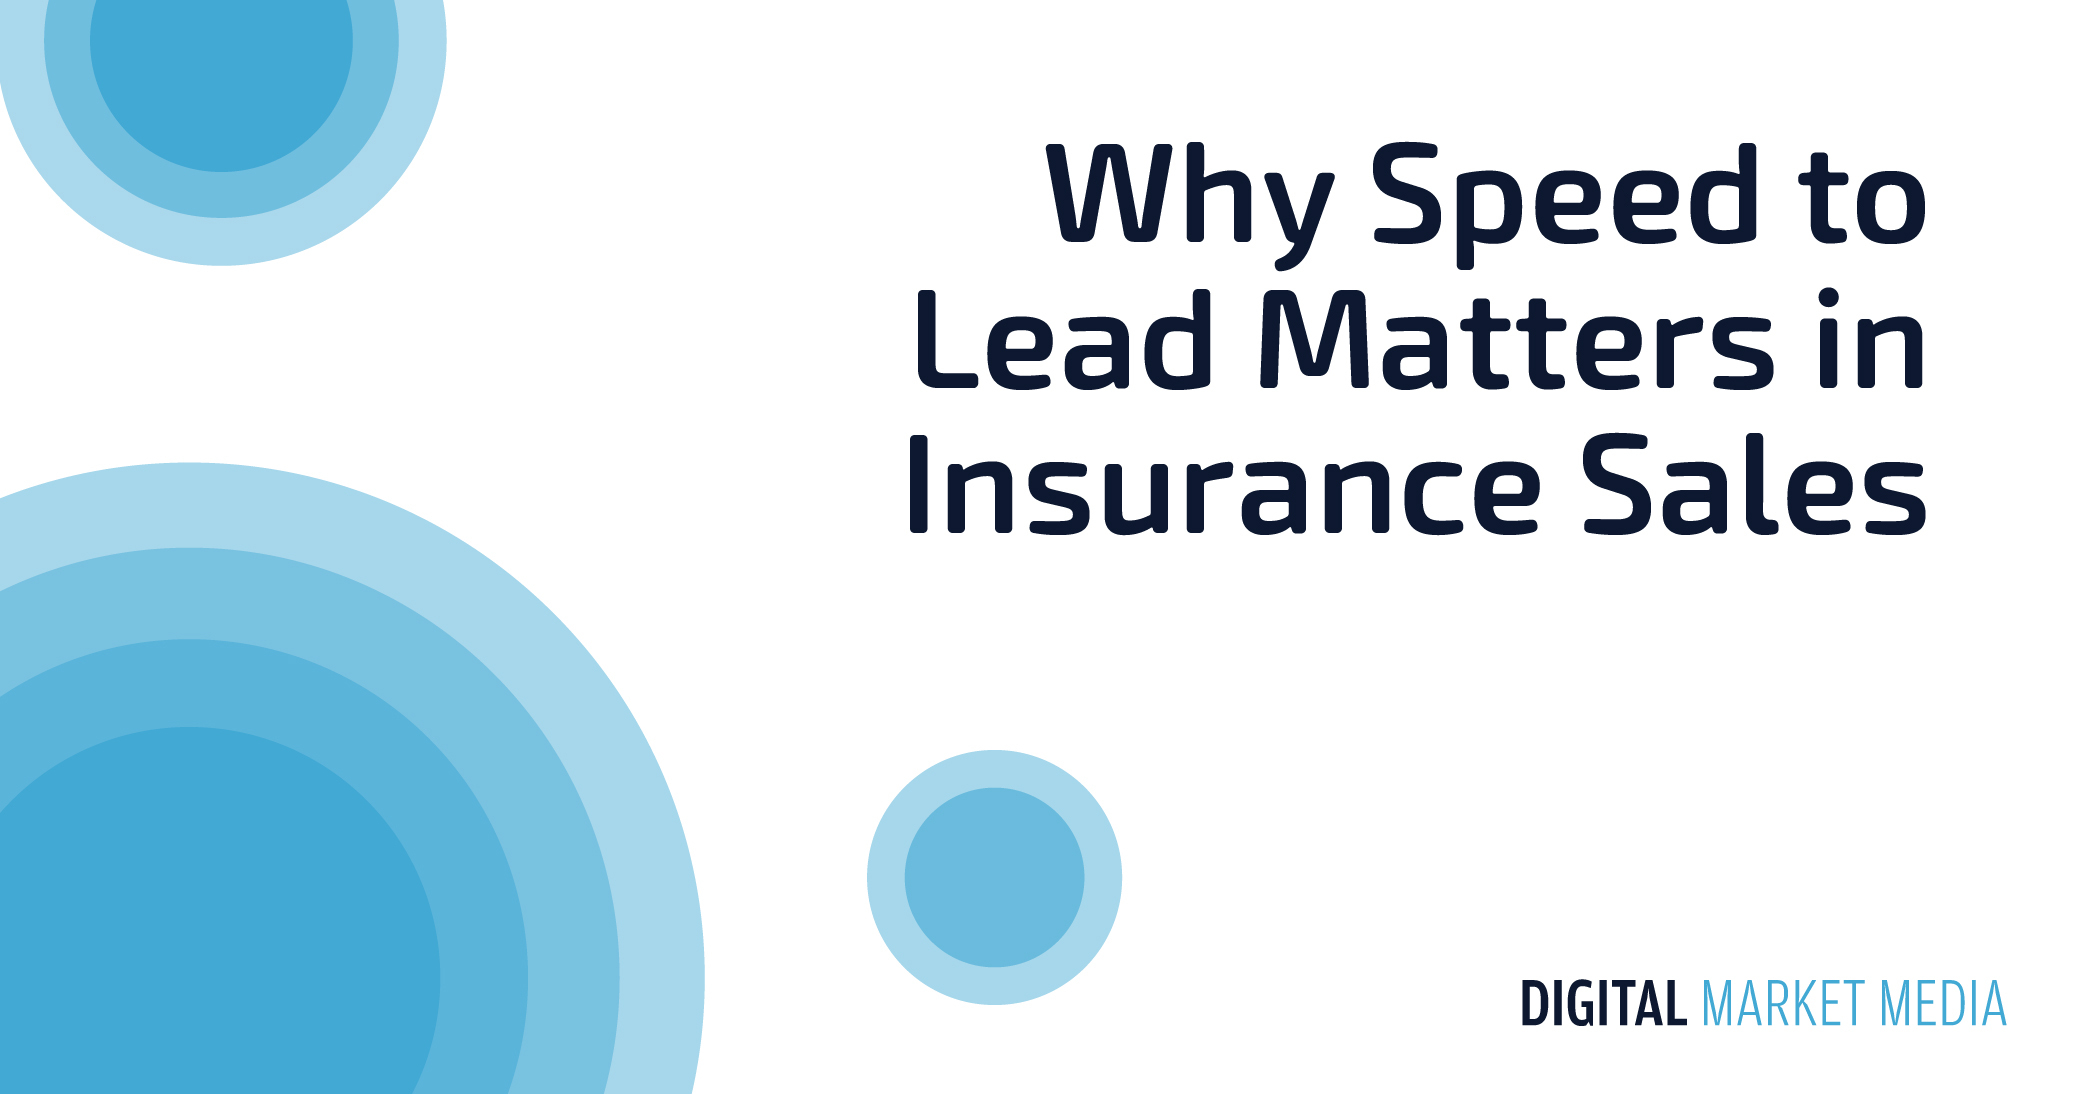 Why Speed To Lead Matters in Insurance Sales